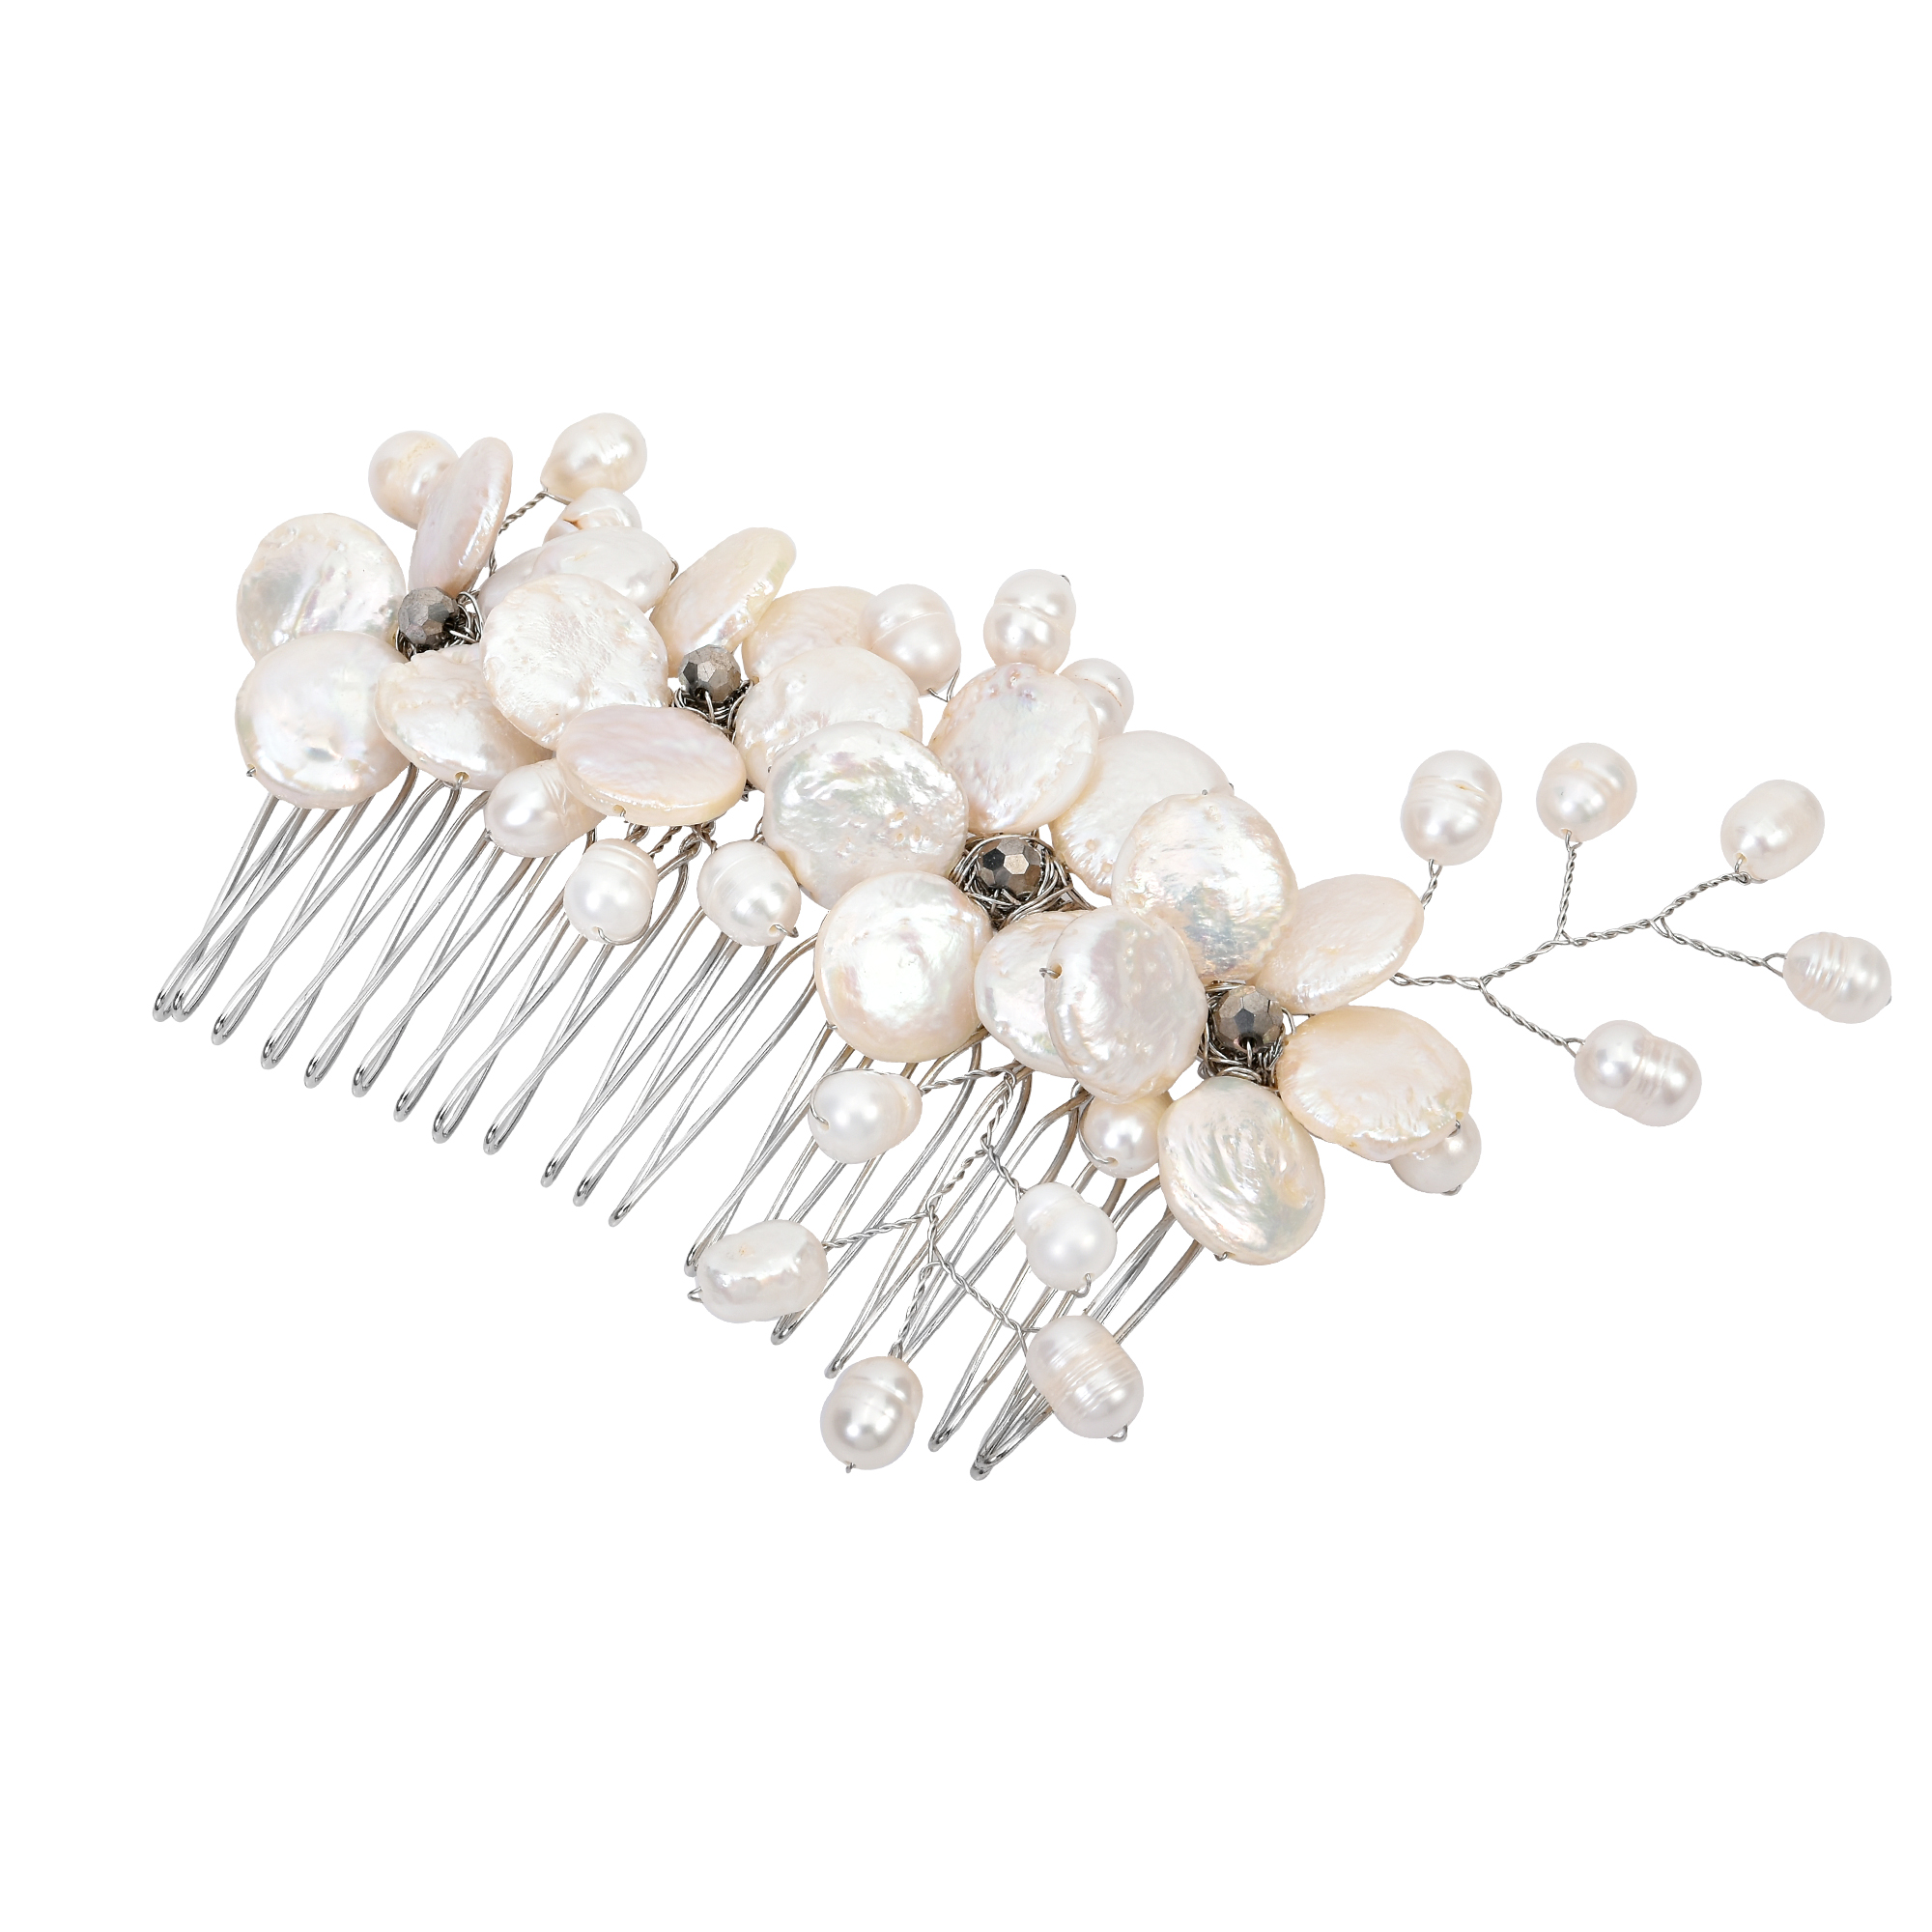 Floral Wreath Freshwater Coin Pearl Bridal Hair Comb - image 5 of 5